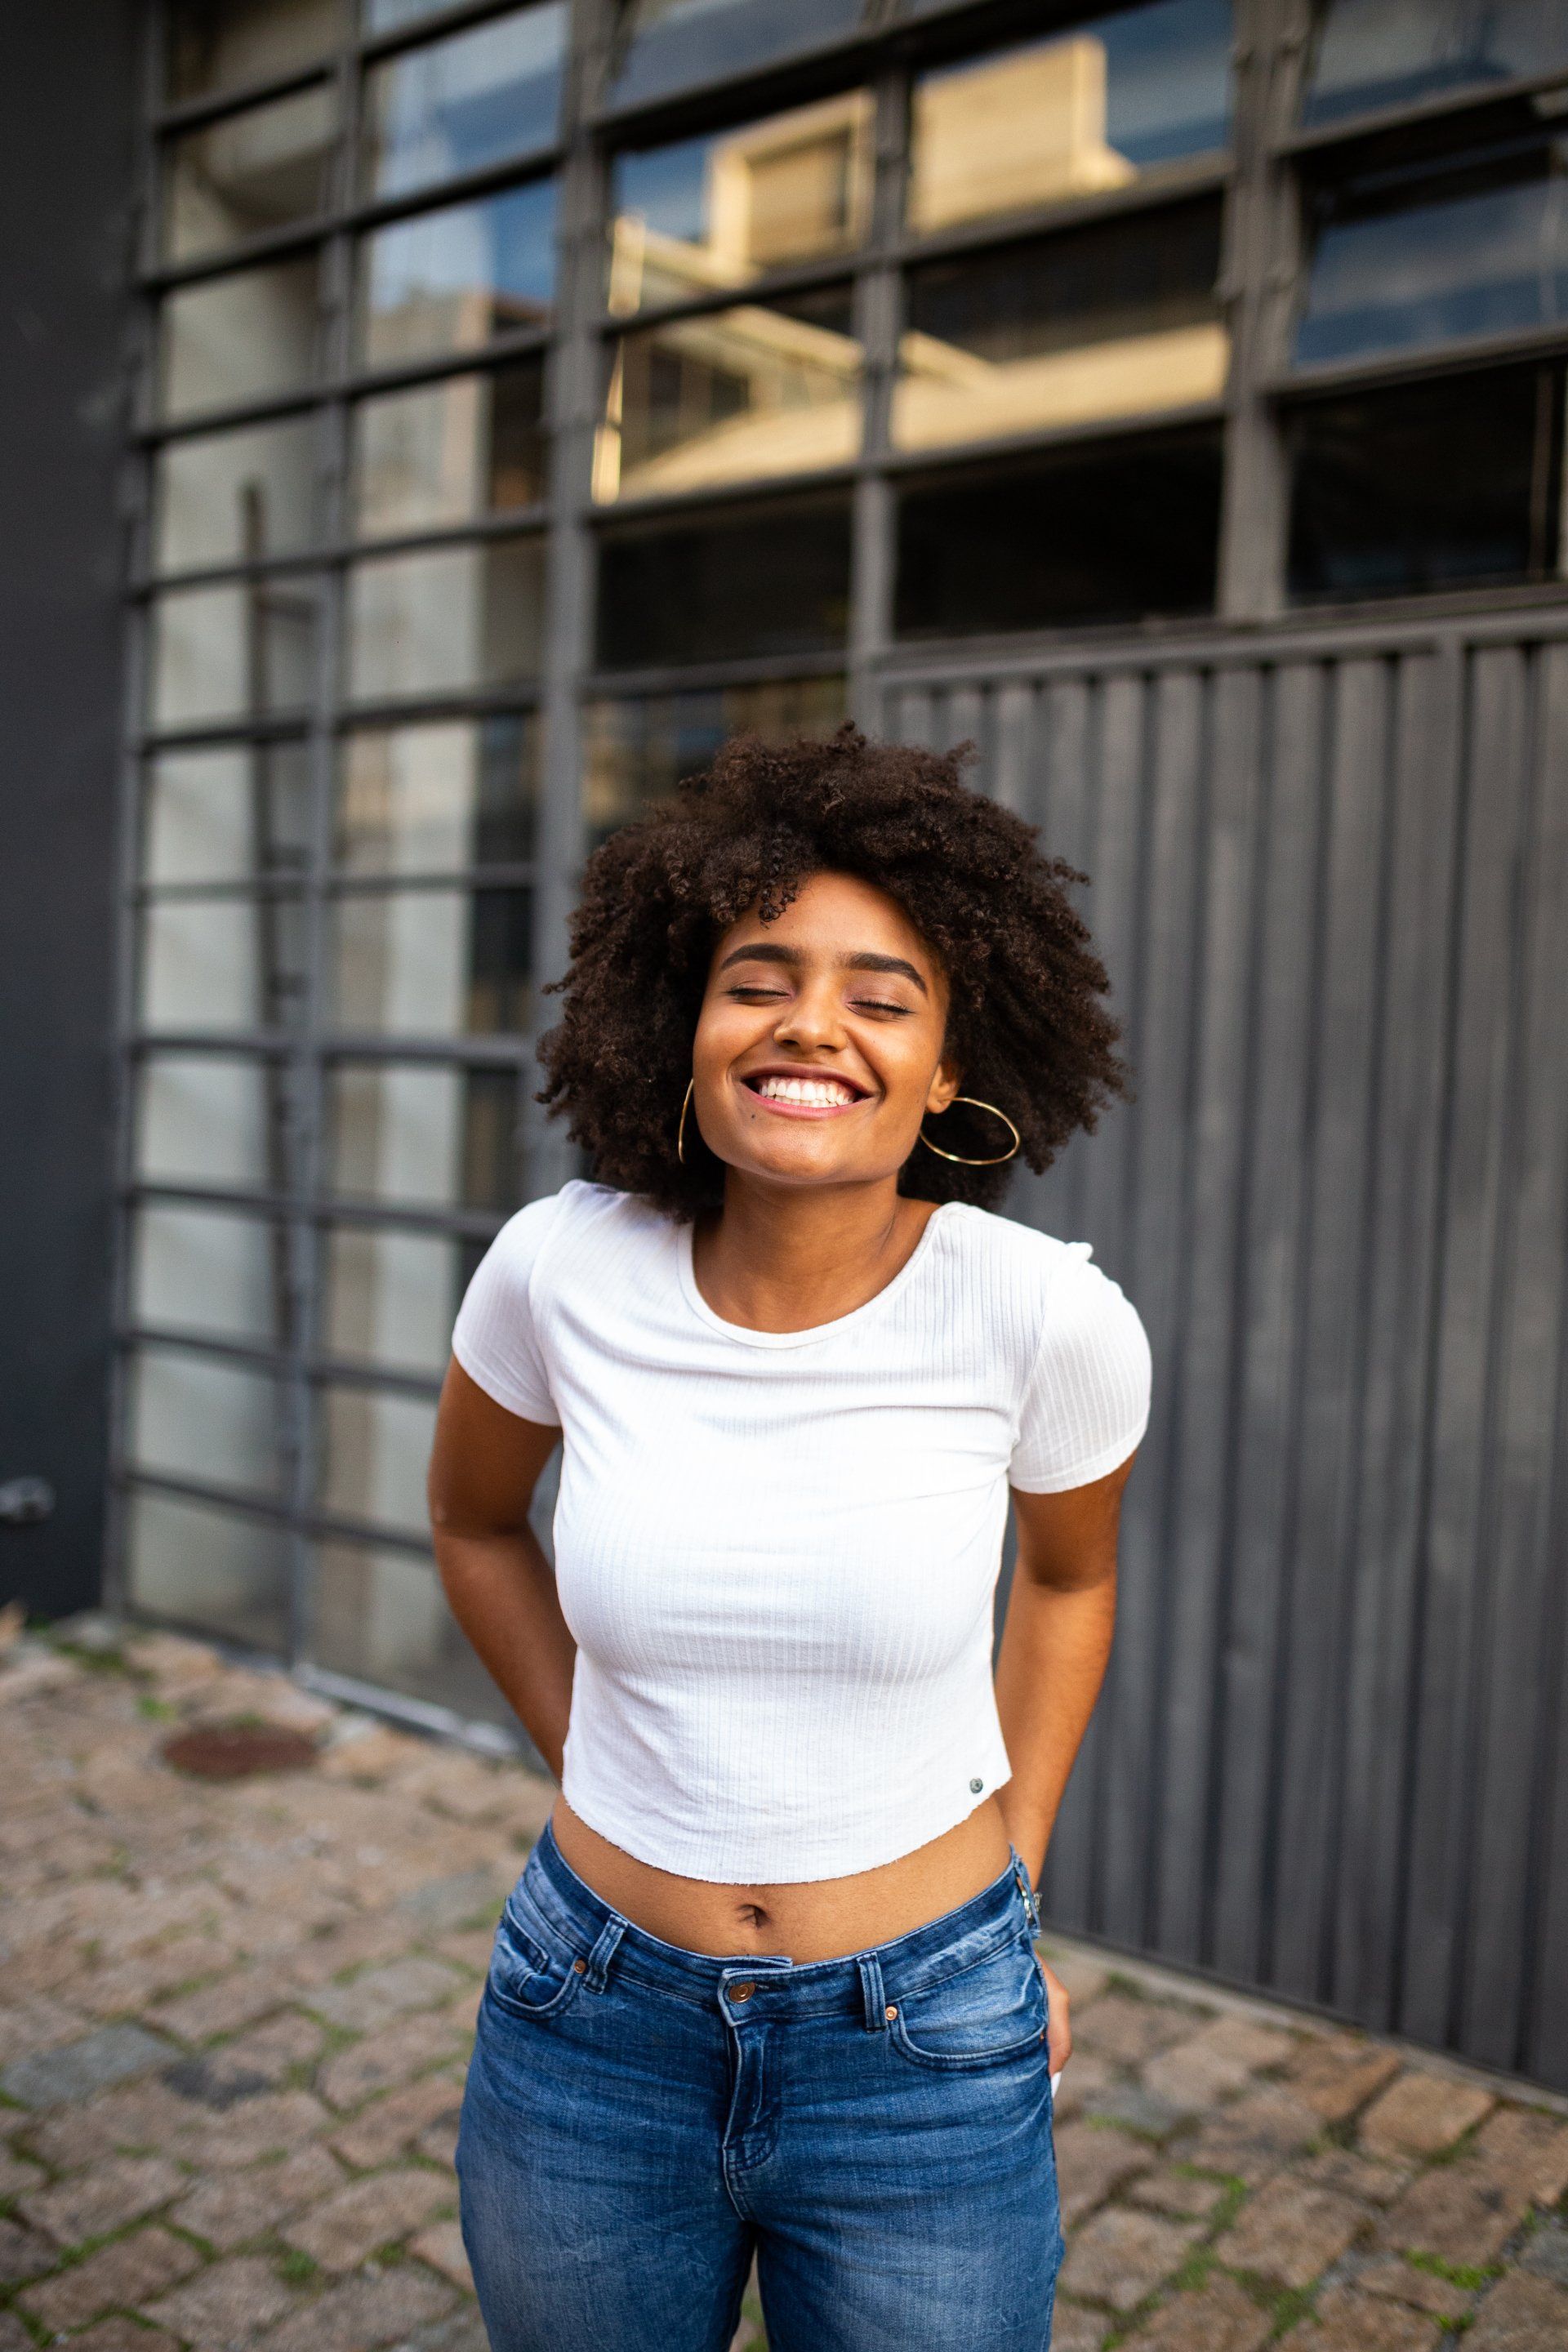 A woman in a white crop top and blue jeans is smiling in front of a building.